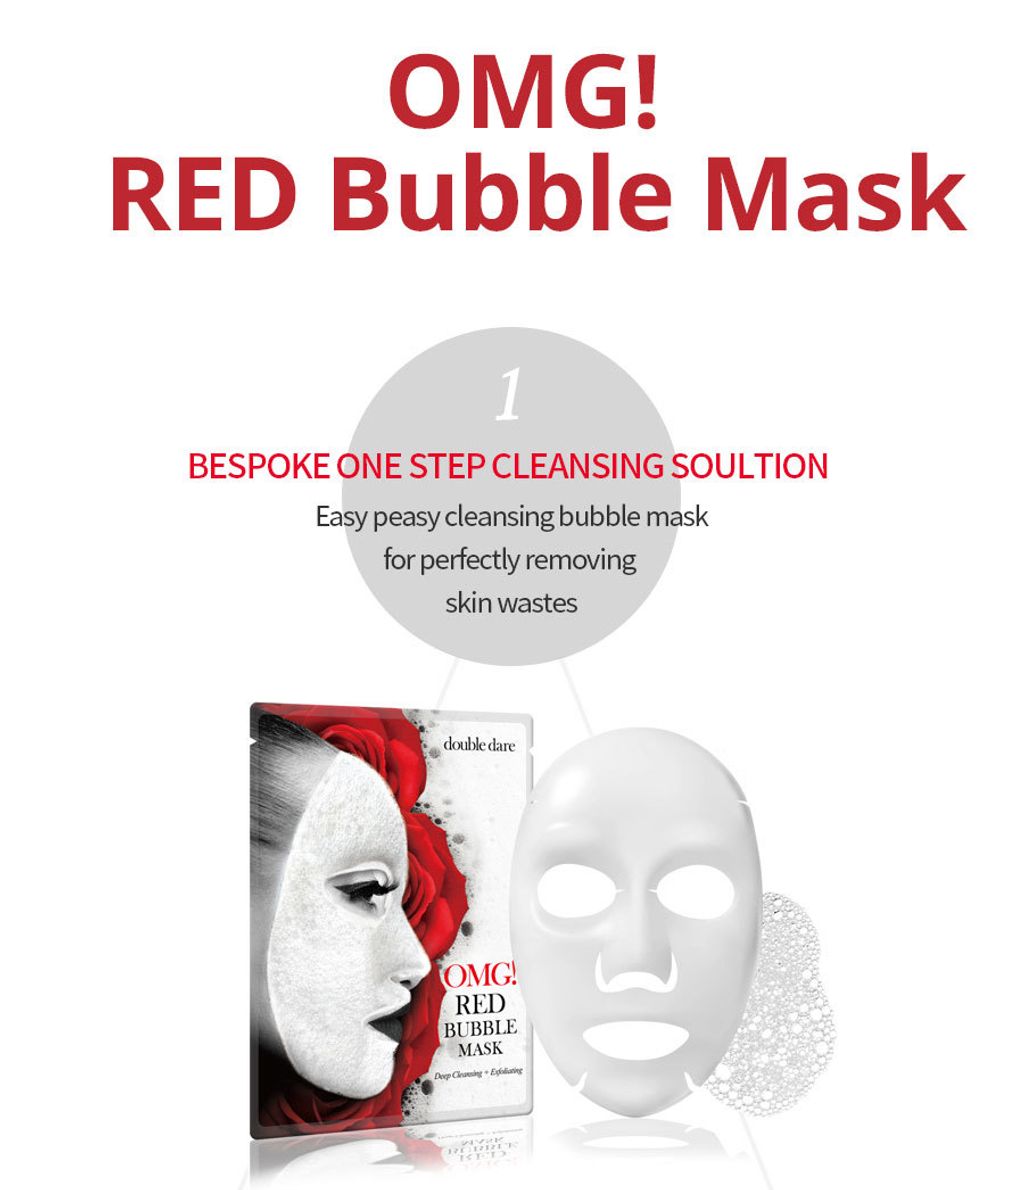 Double-Dare-OMG!-Red-Bubble-Mask-1_07.jpg